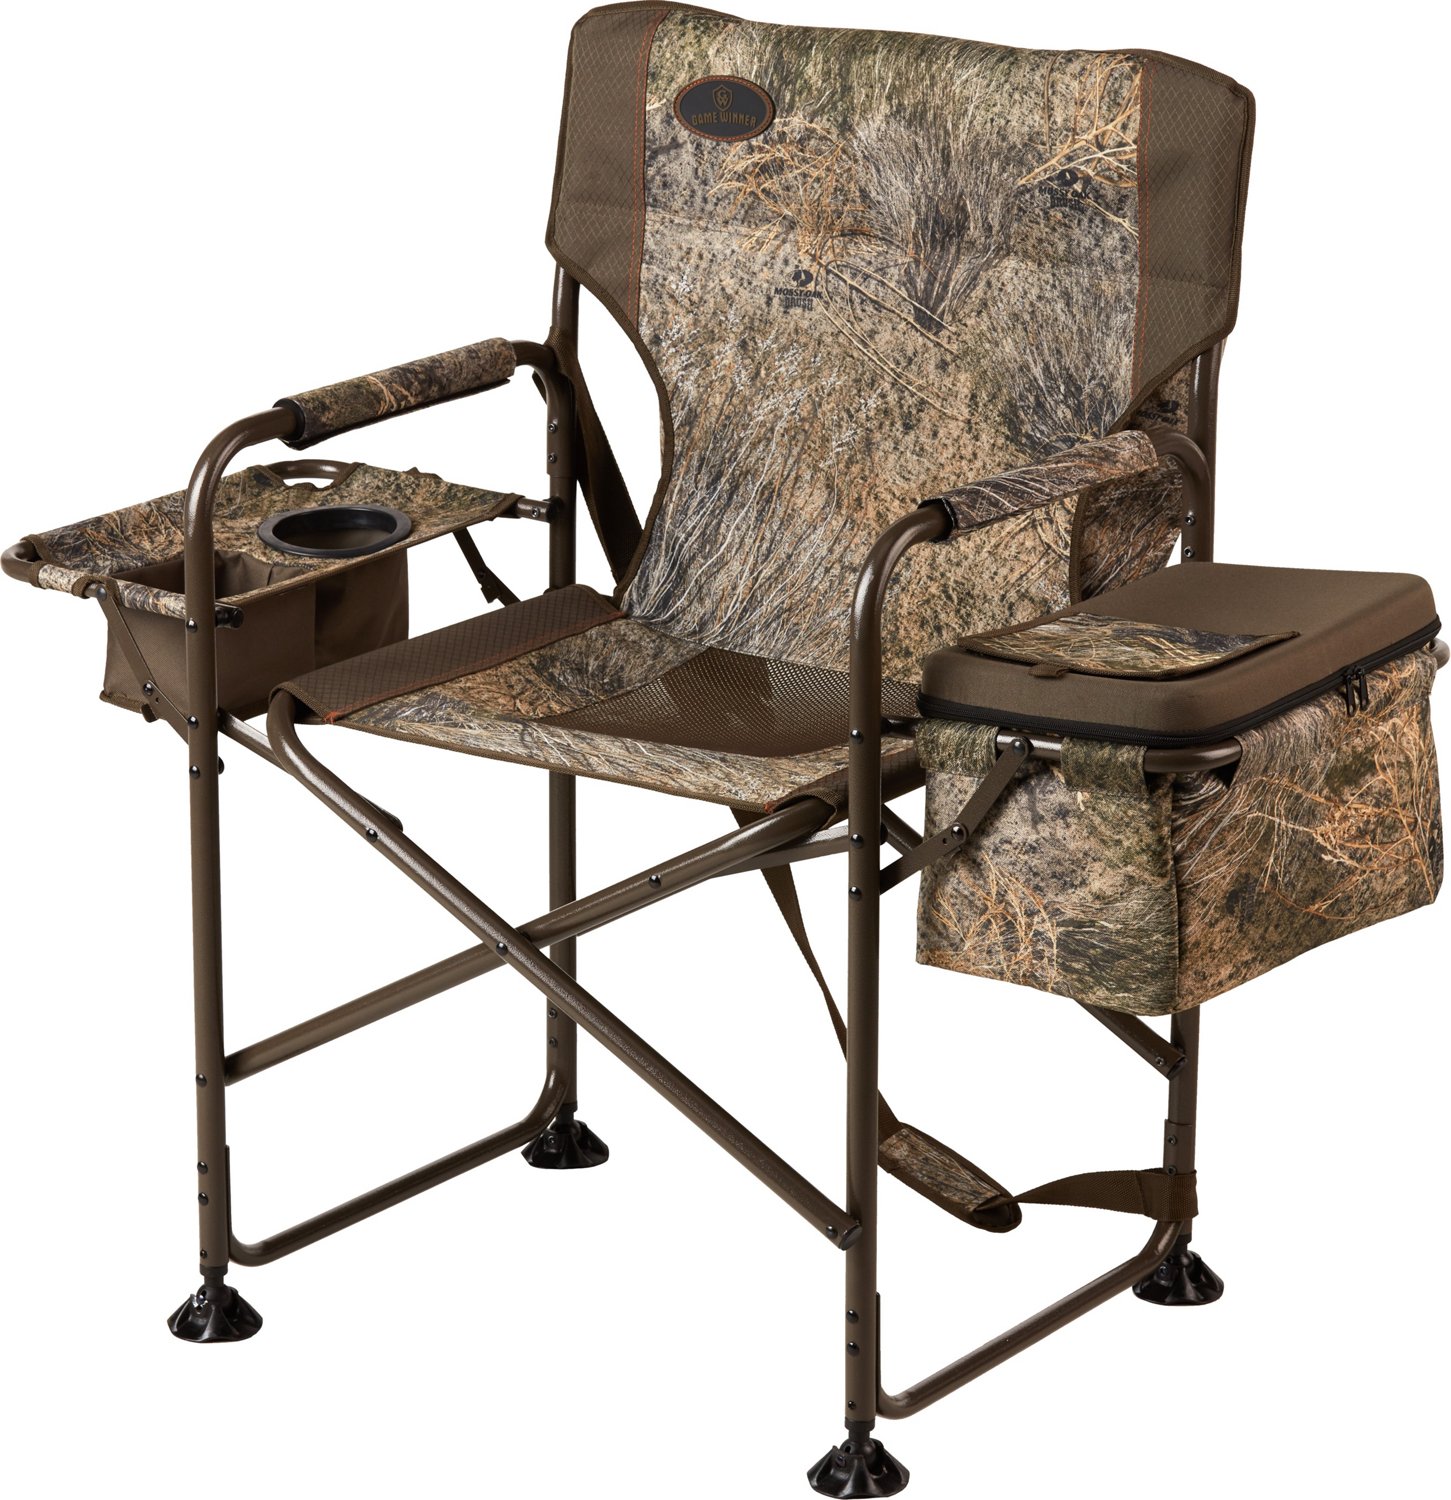 Hunting Blind Chairs \u0026 Stools | Academy